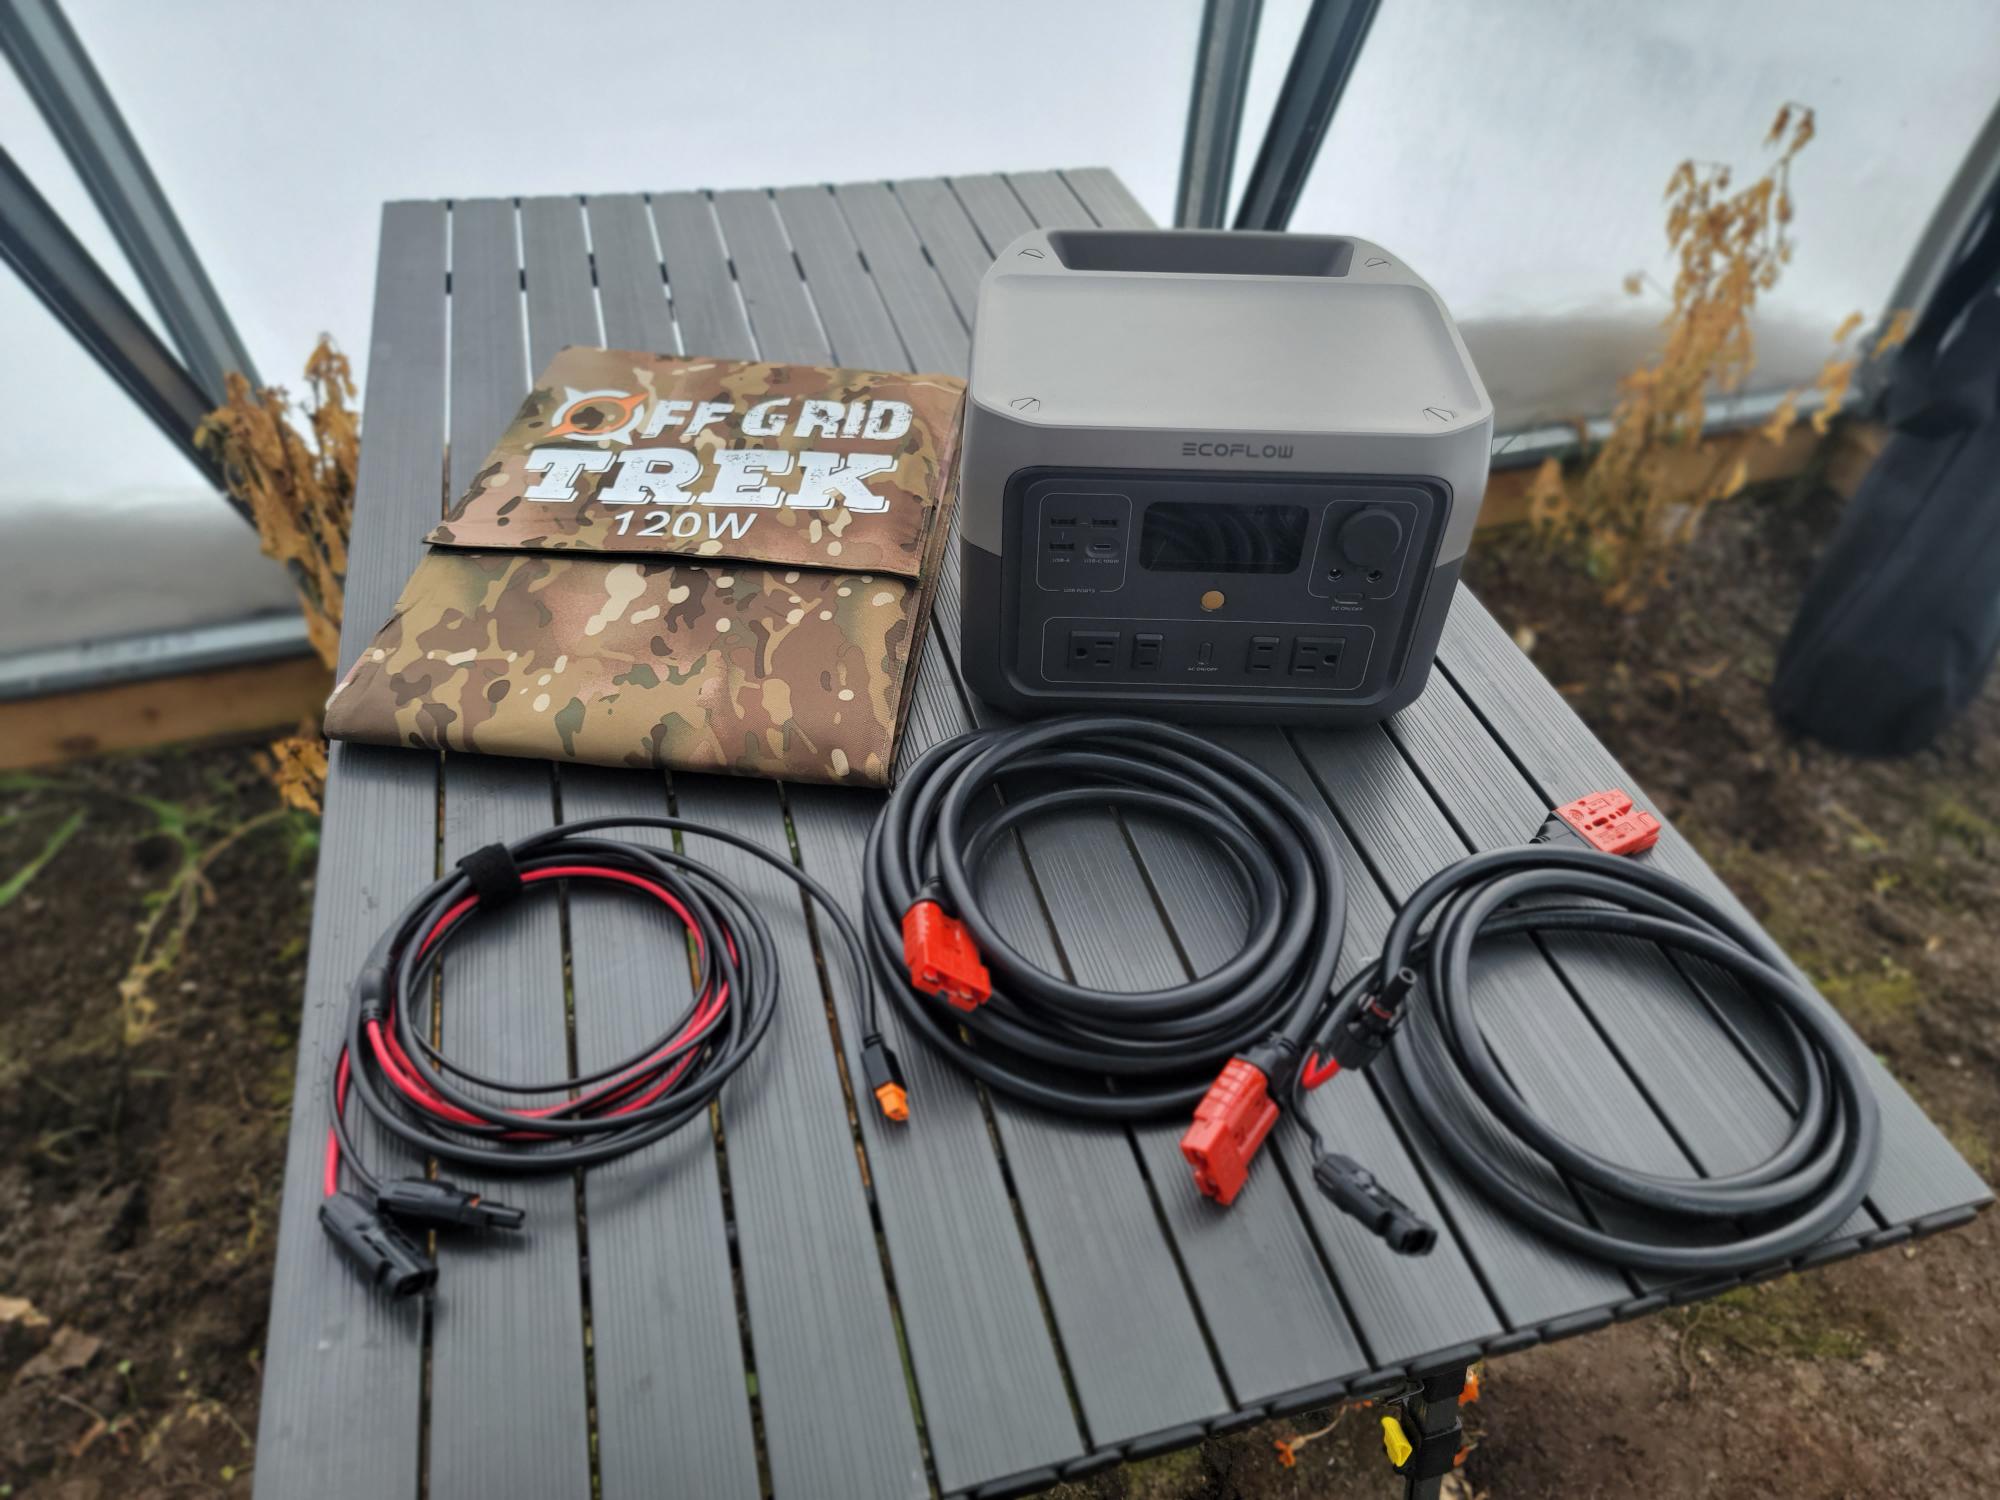 EcoFlow River 2 Max charging station review 